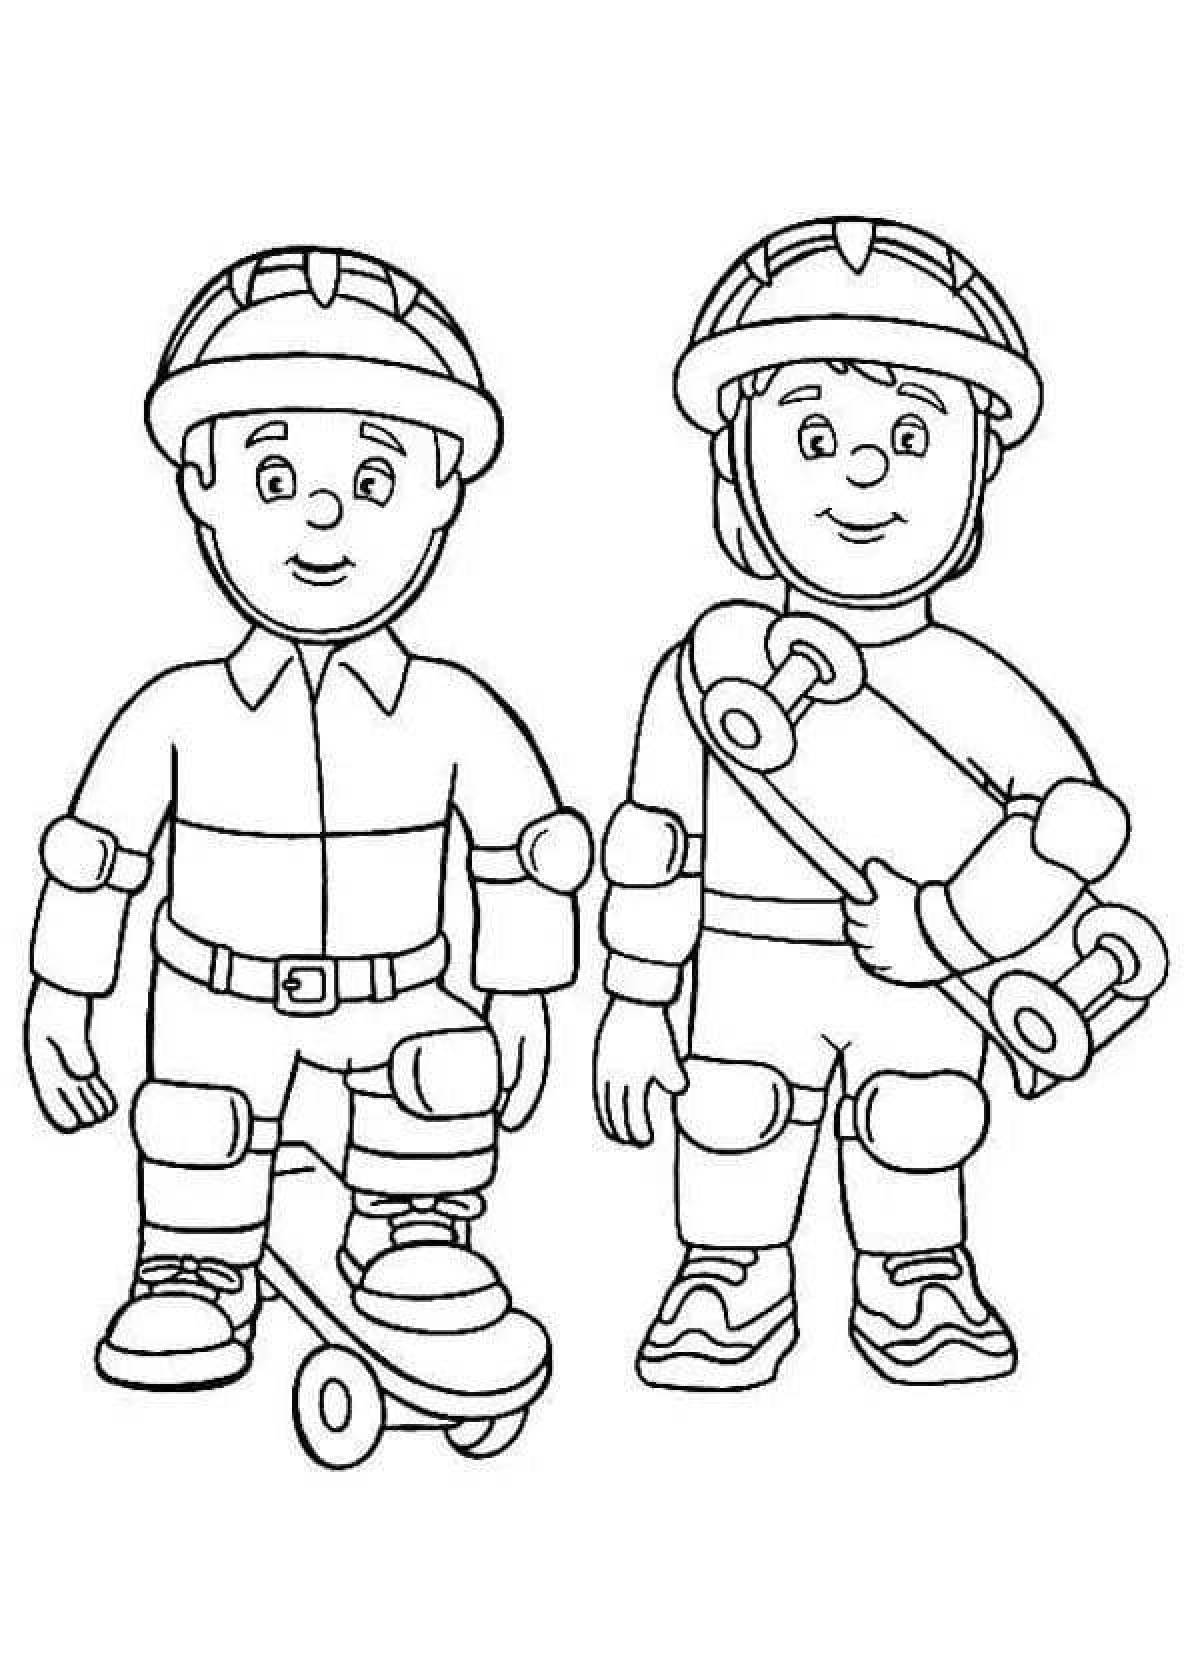 Coloring book is an amazing profession of a firefighter